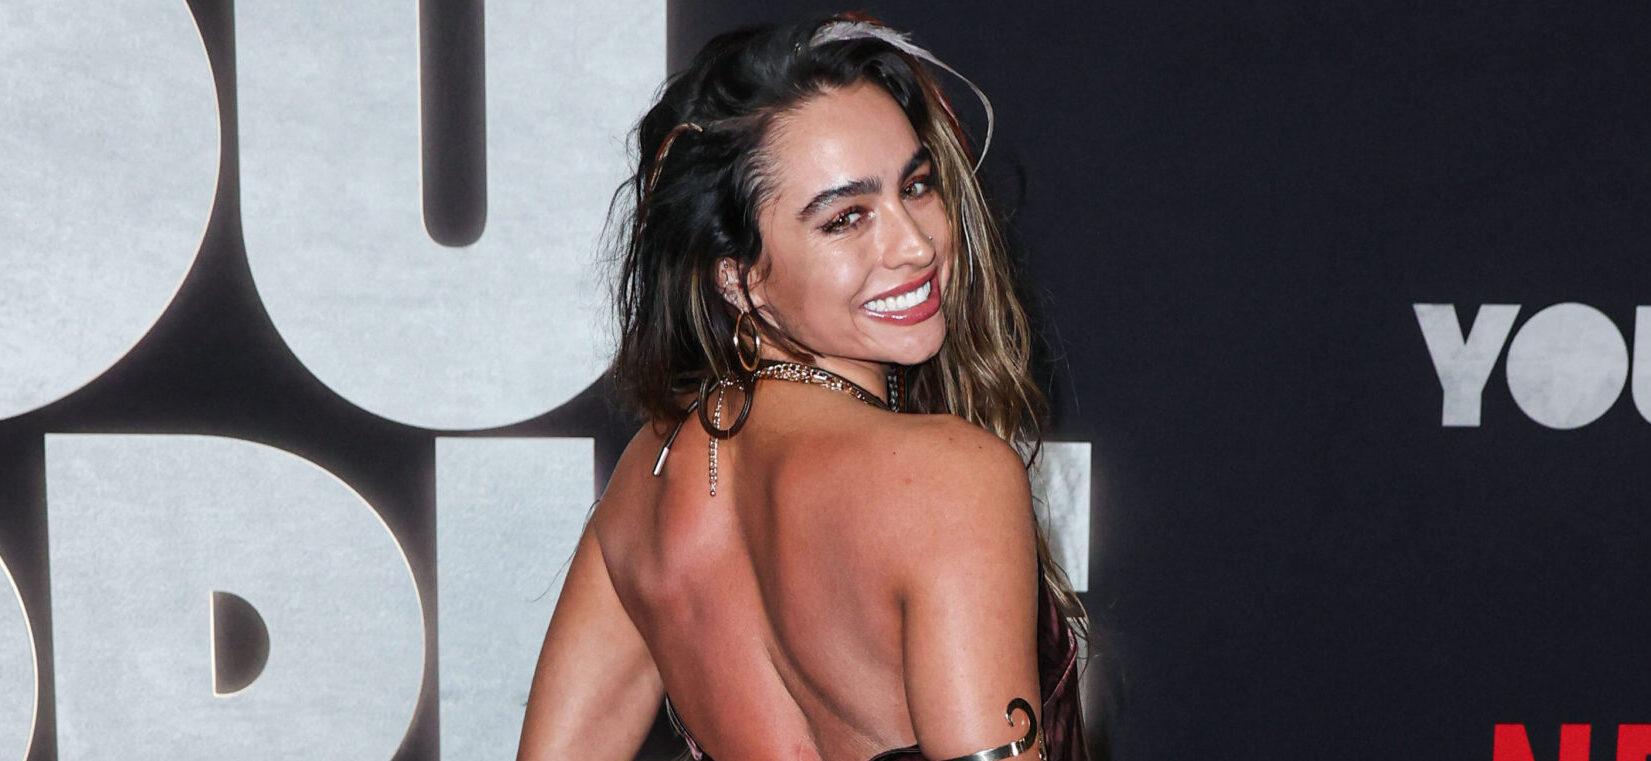 Sommer Ray Has The Internet Drooling With Her Stunning Bikini Photos